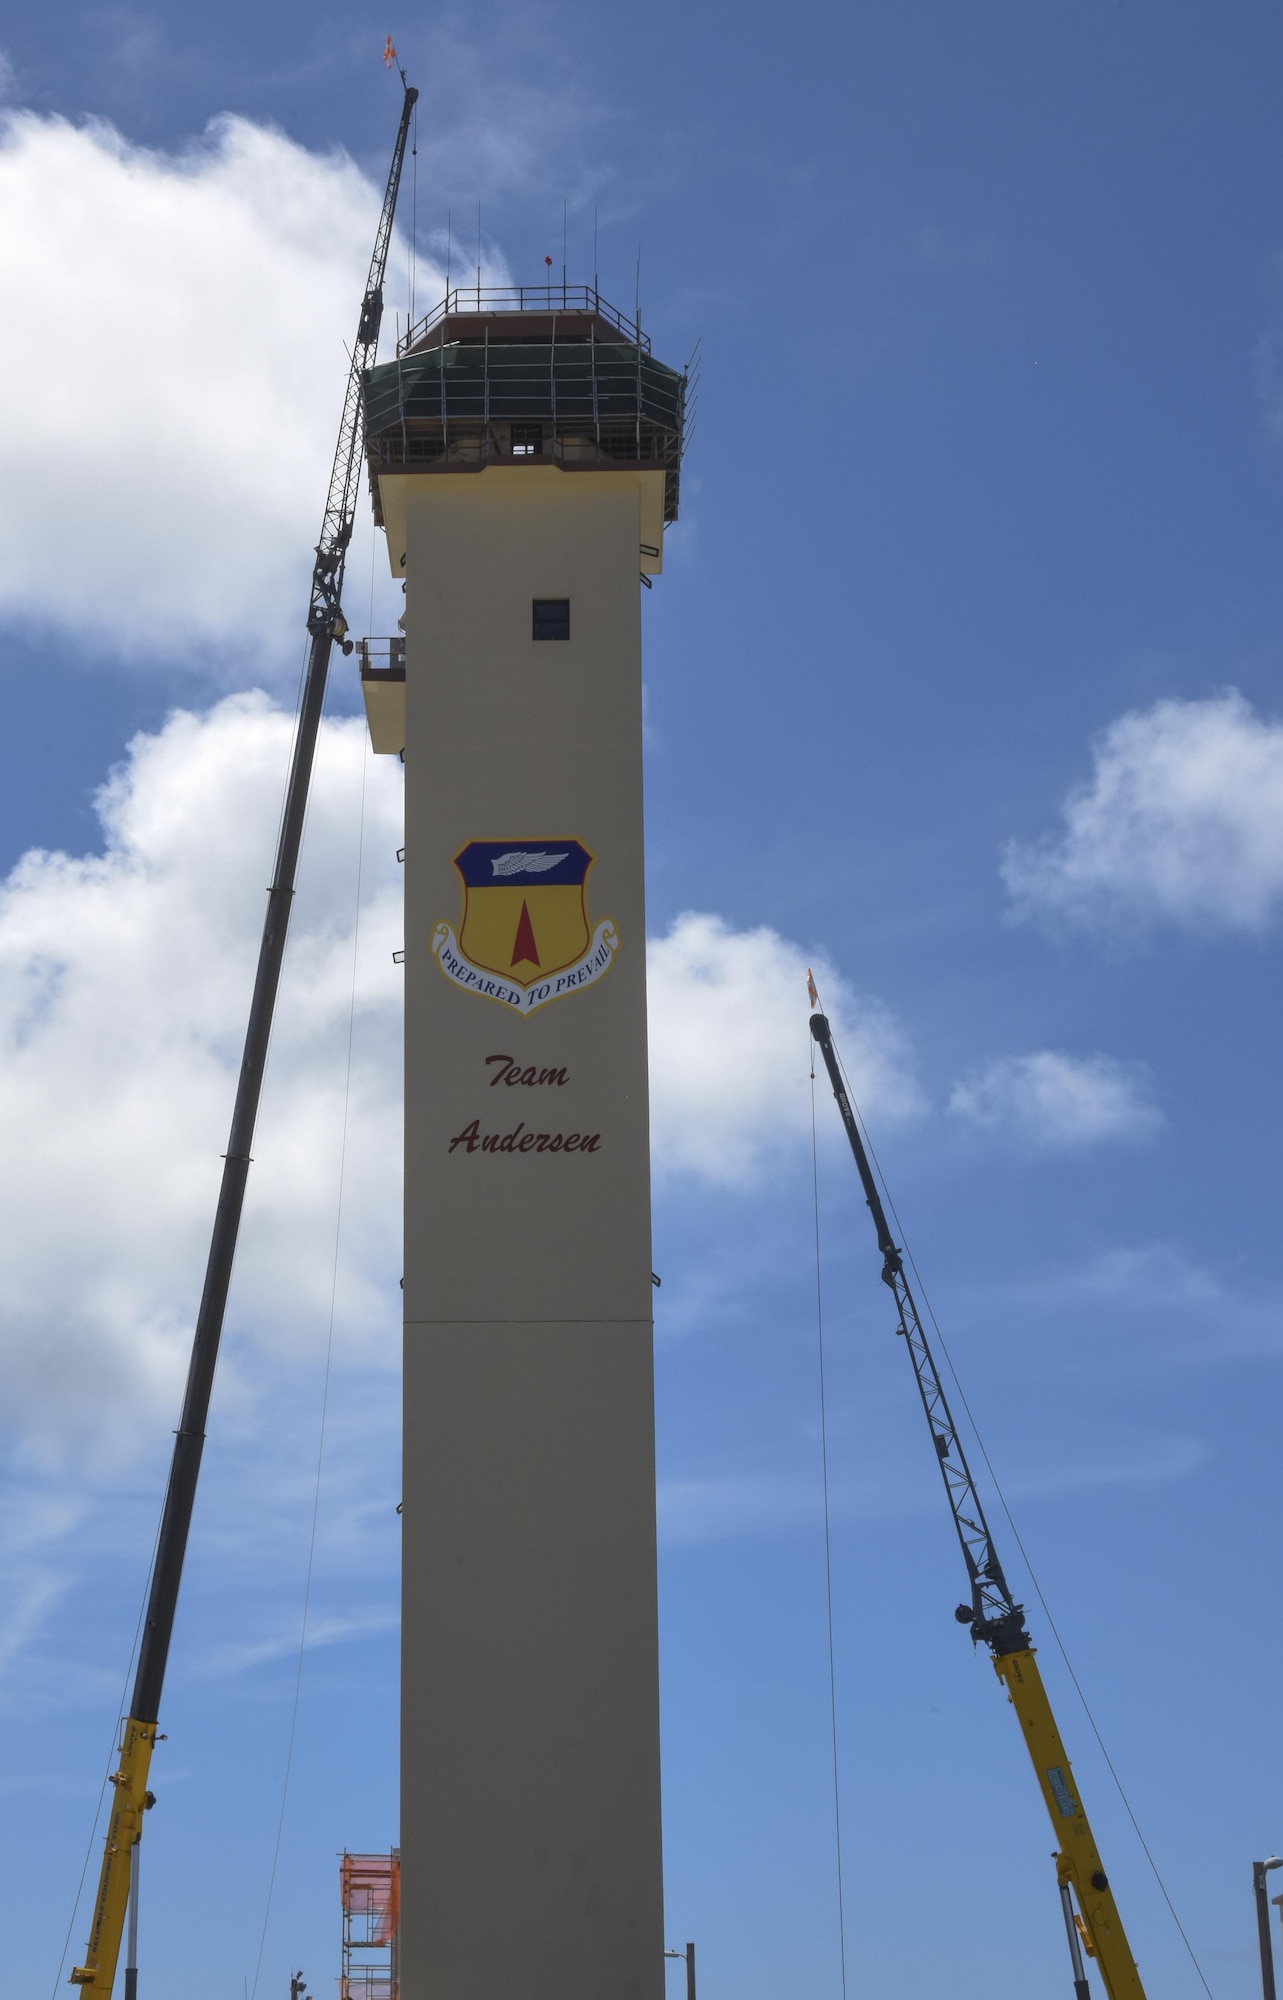 The Andersen control tower under goes renovations June 12, 2017, at Andersen Air Force Base, Guam. Air traffic control Airmen assigned to the 36th Operation Support Squadron began work in the new tower June 30 after spending almost three months working in the mobile tower unit on the flightline. (U.S. Air Force Photo by Tech Sgt. Richard P. Ebensberger)